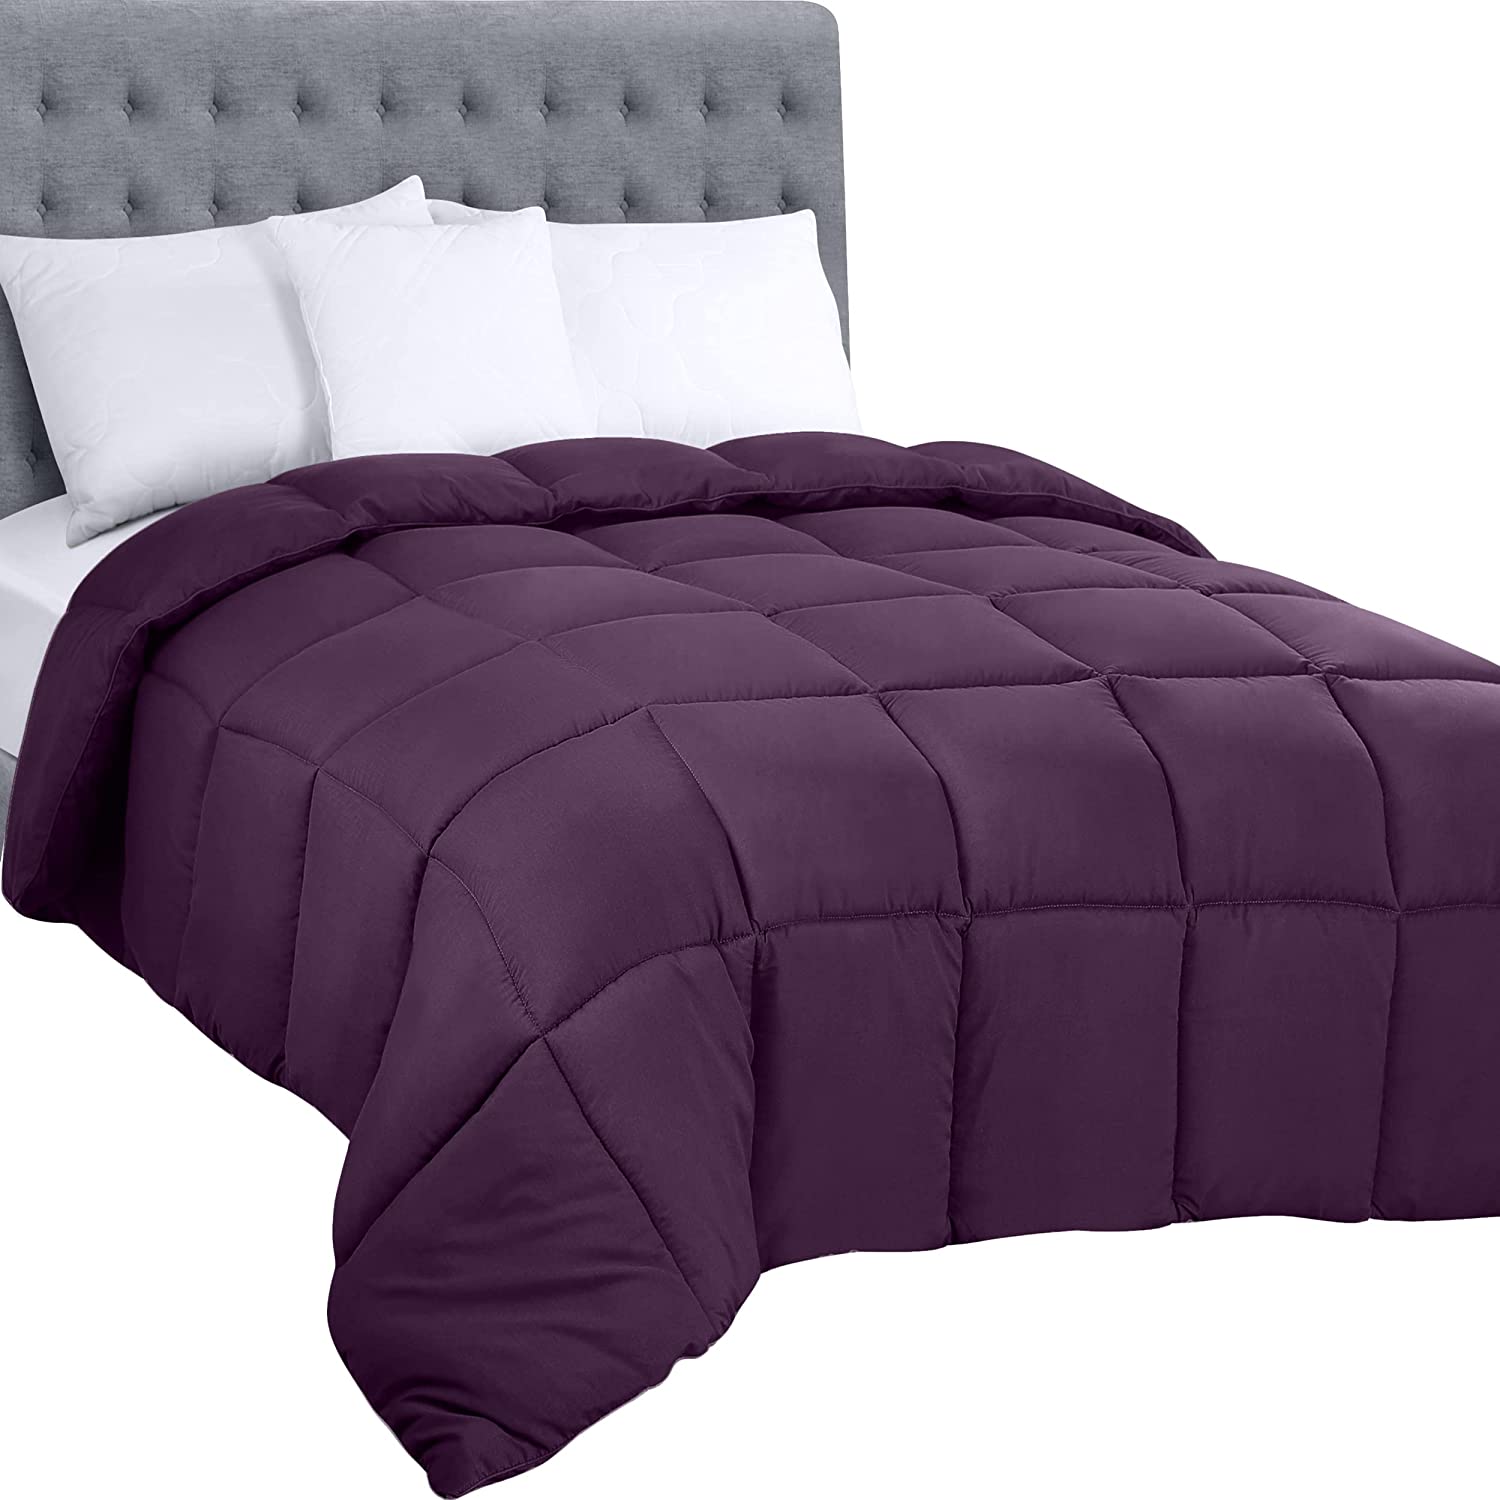 Utopia Bedding Premium Cotton Blanket Queen Plum - Soft Breathable Thermal  Blanket 350 GSM - Ideal for Layering Any Bed Twin 